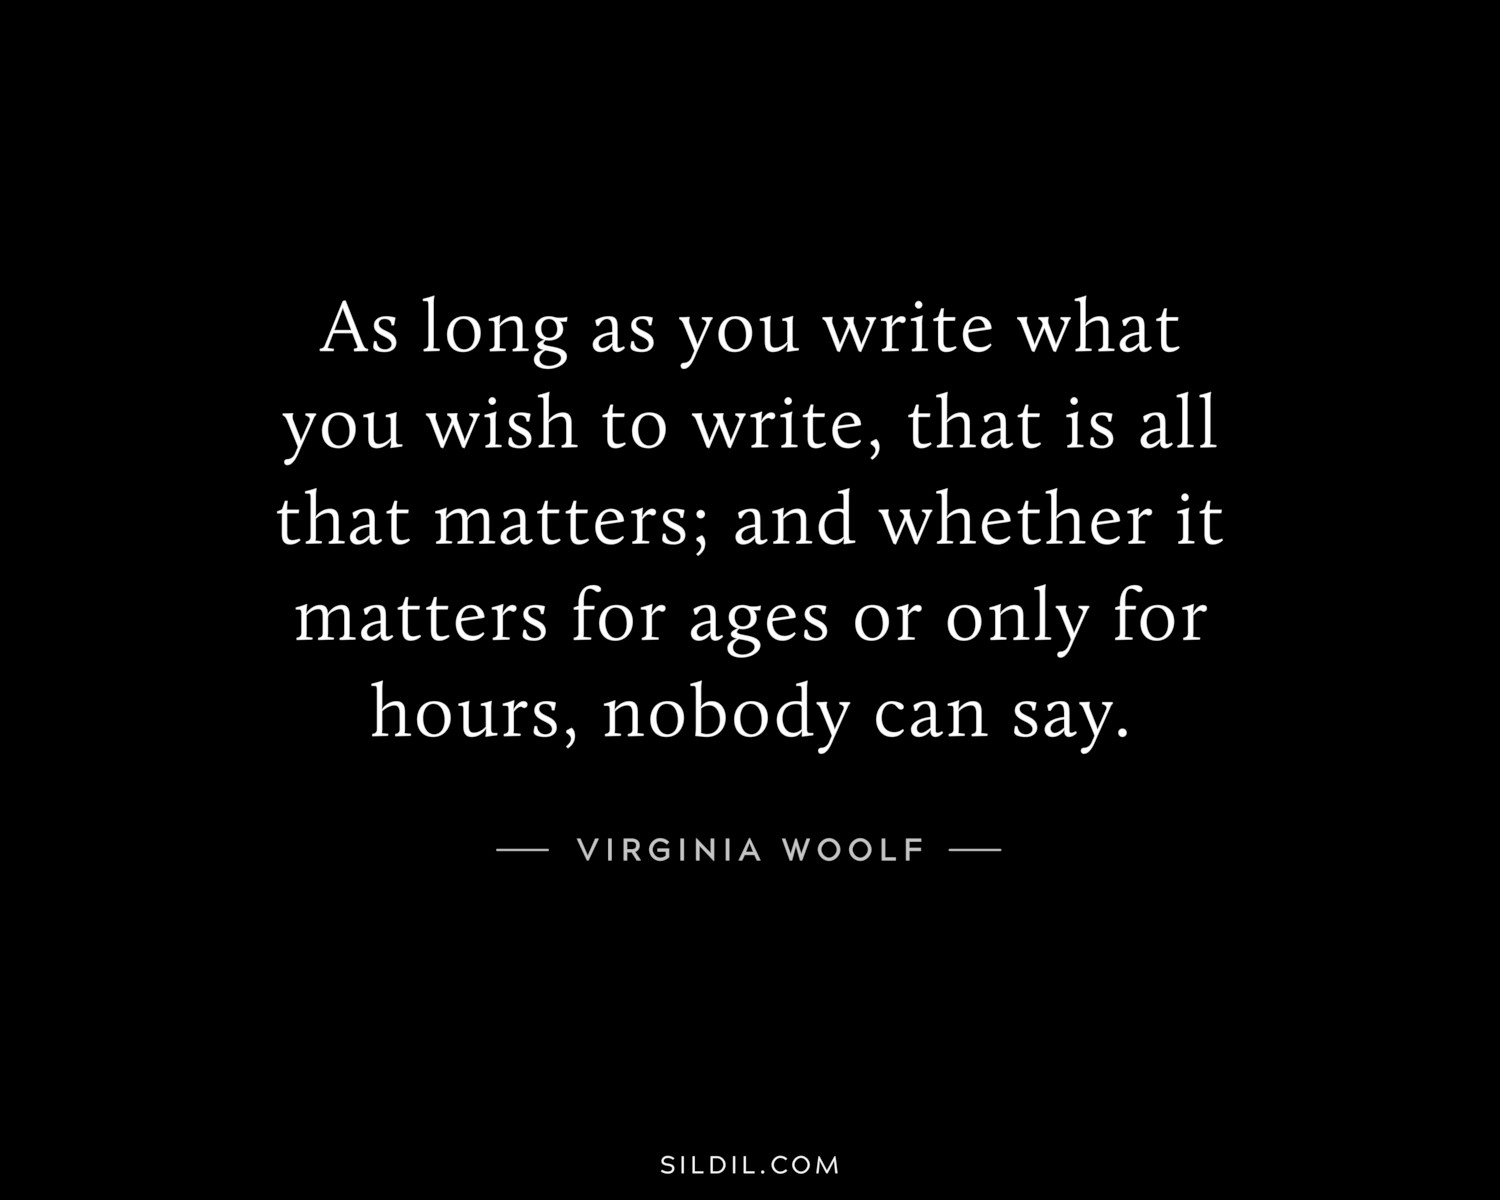 As long as you write what you wish to write, that is all that matters; and whether it matters for ages or only for hours, nobody can say.